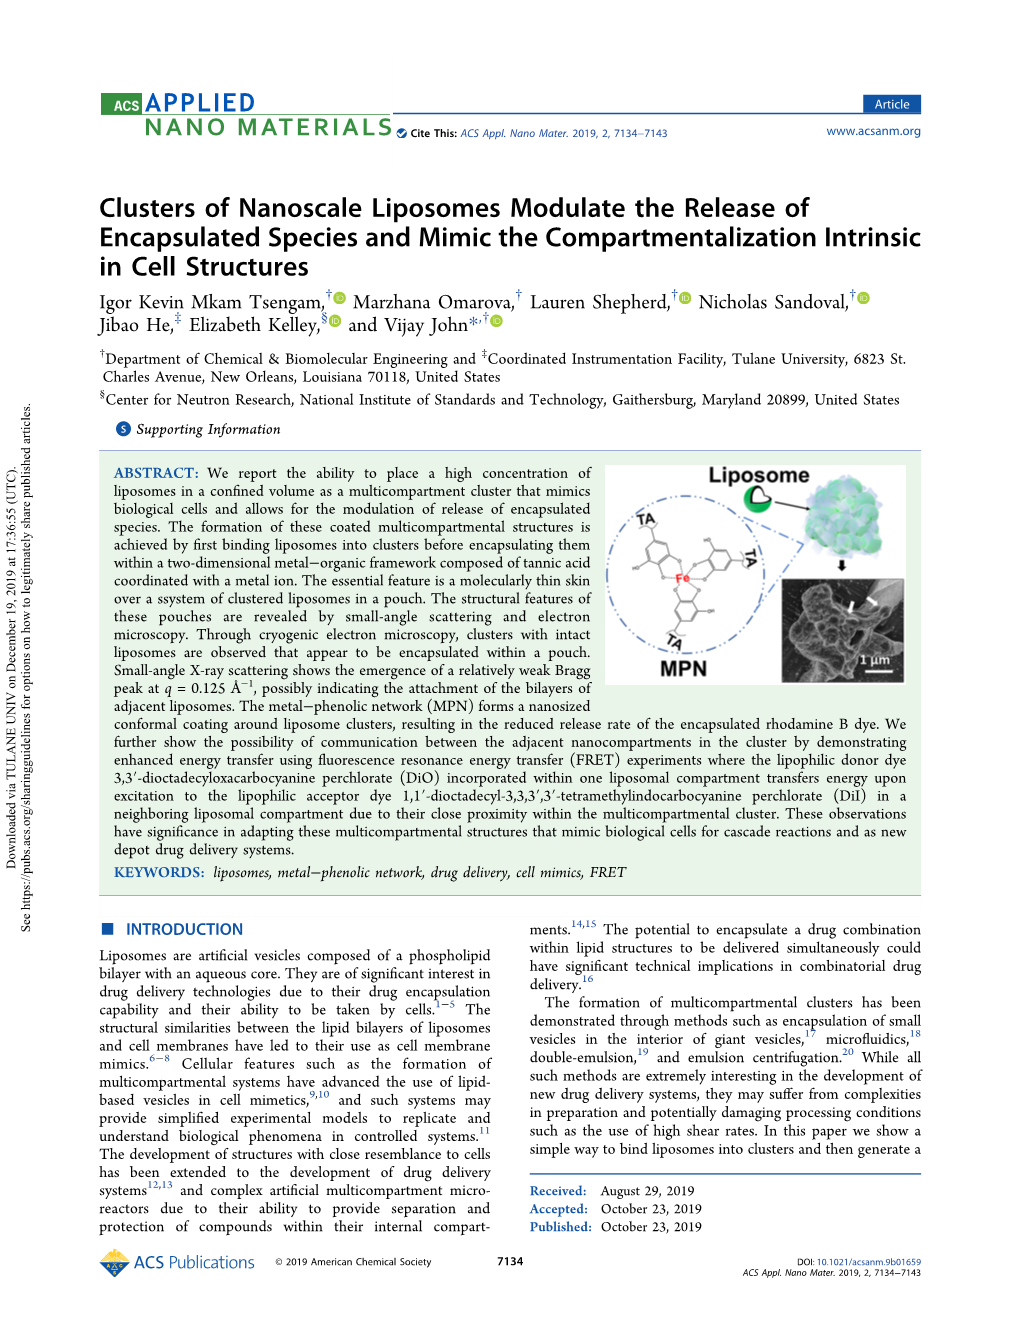 Clusters of Nanoscale Liposomes Modulate the Release Of